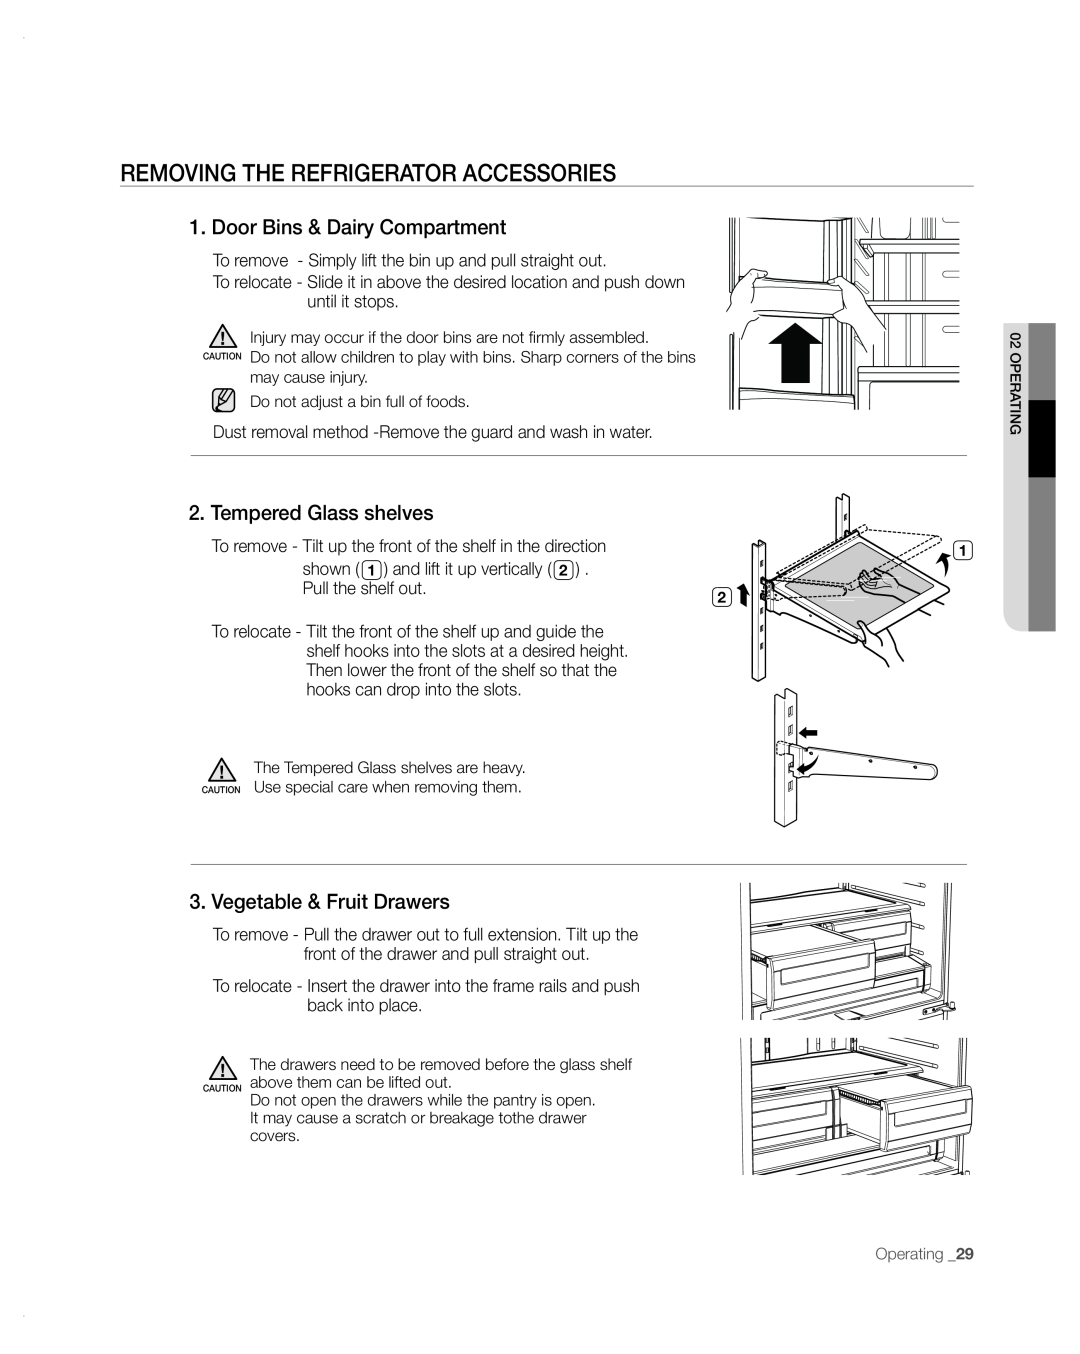 Samsung RFG297AA user manual Removing The Refrigerator Accessories, Door Bins & Dairy Compartment, Tempered Glass shelves 